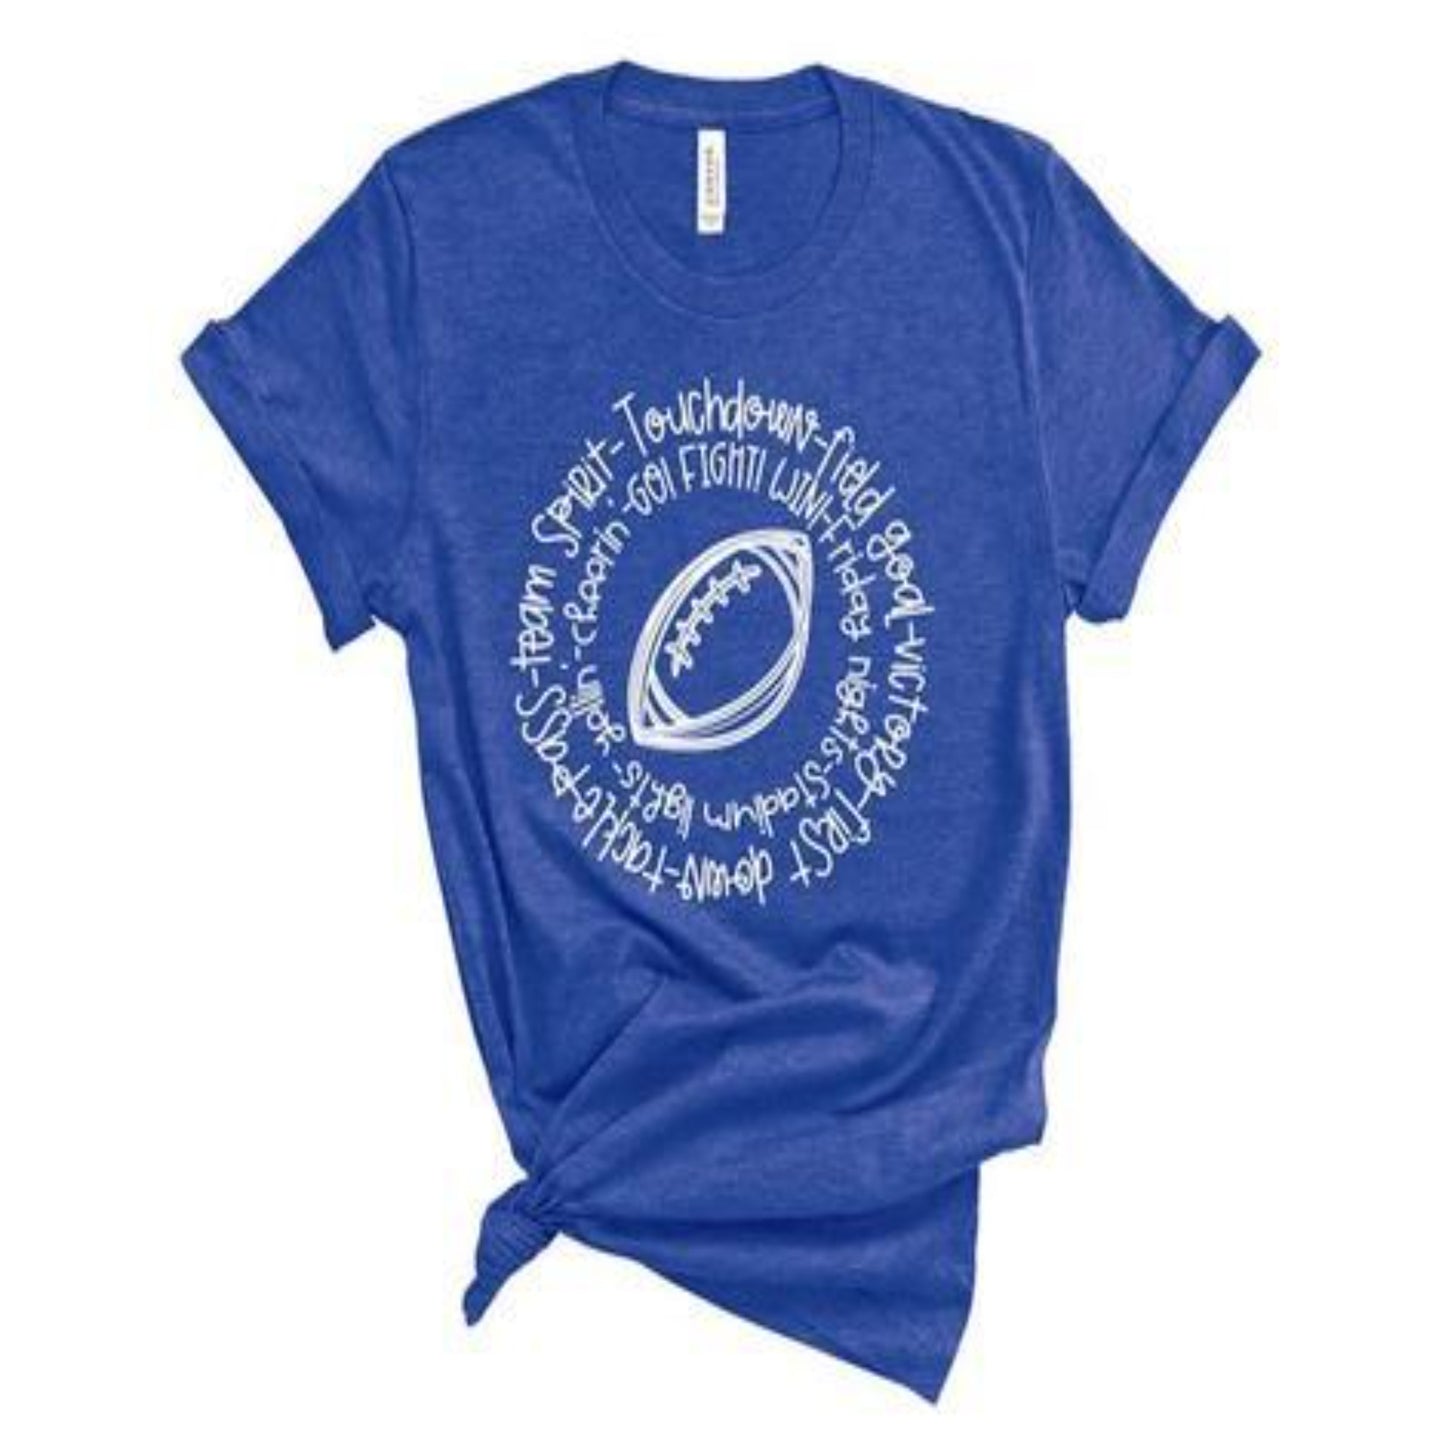 football_touchdown_team_spirit_tackle_pass specialty tee everyday wear  casual shirt comfortable tshirt